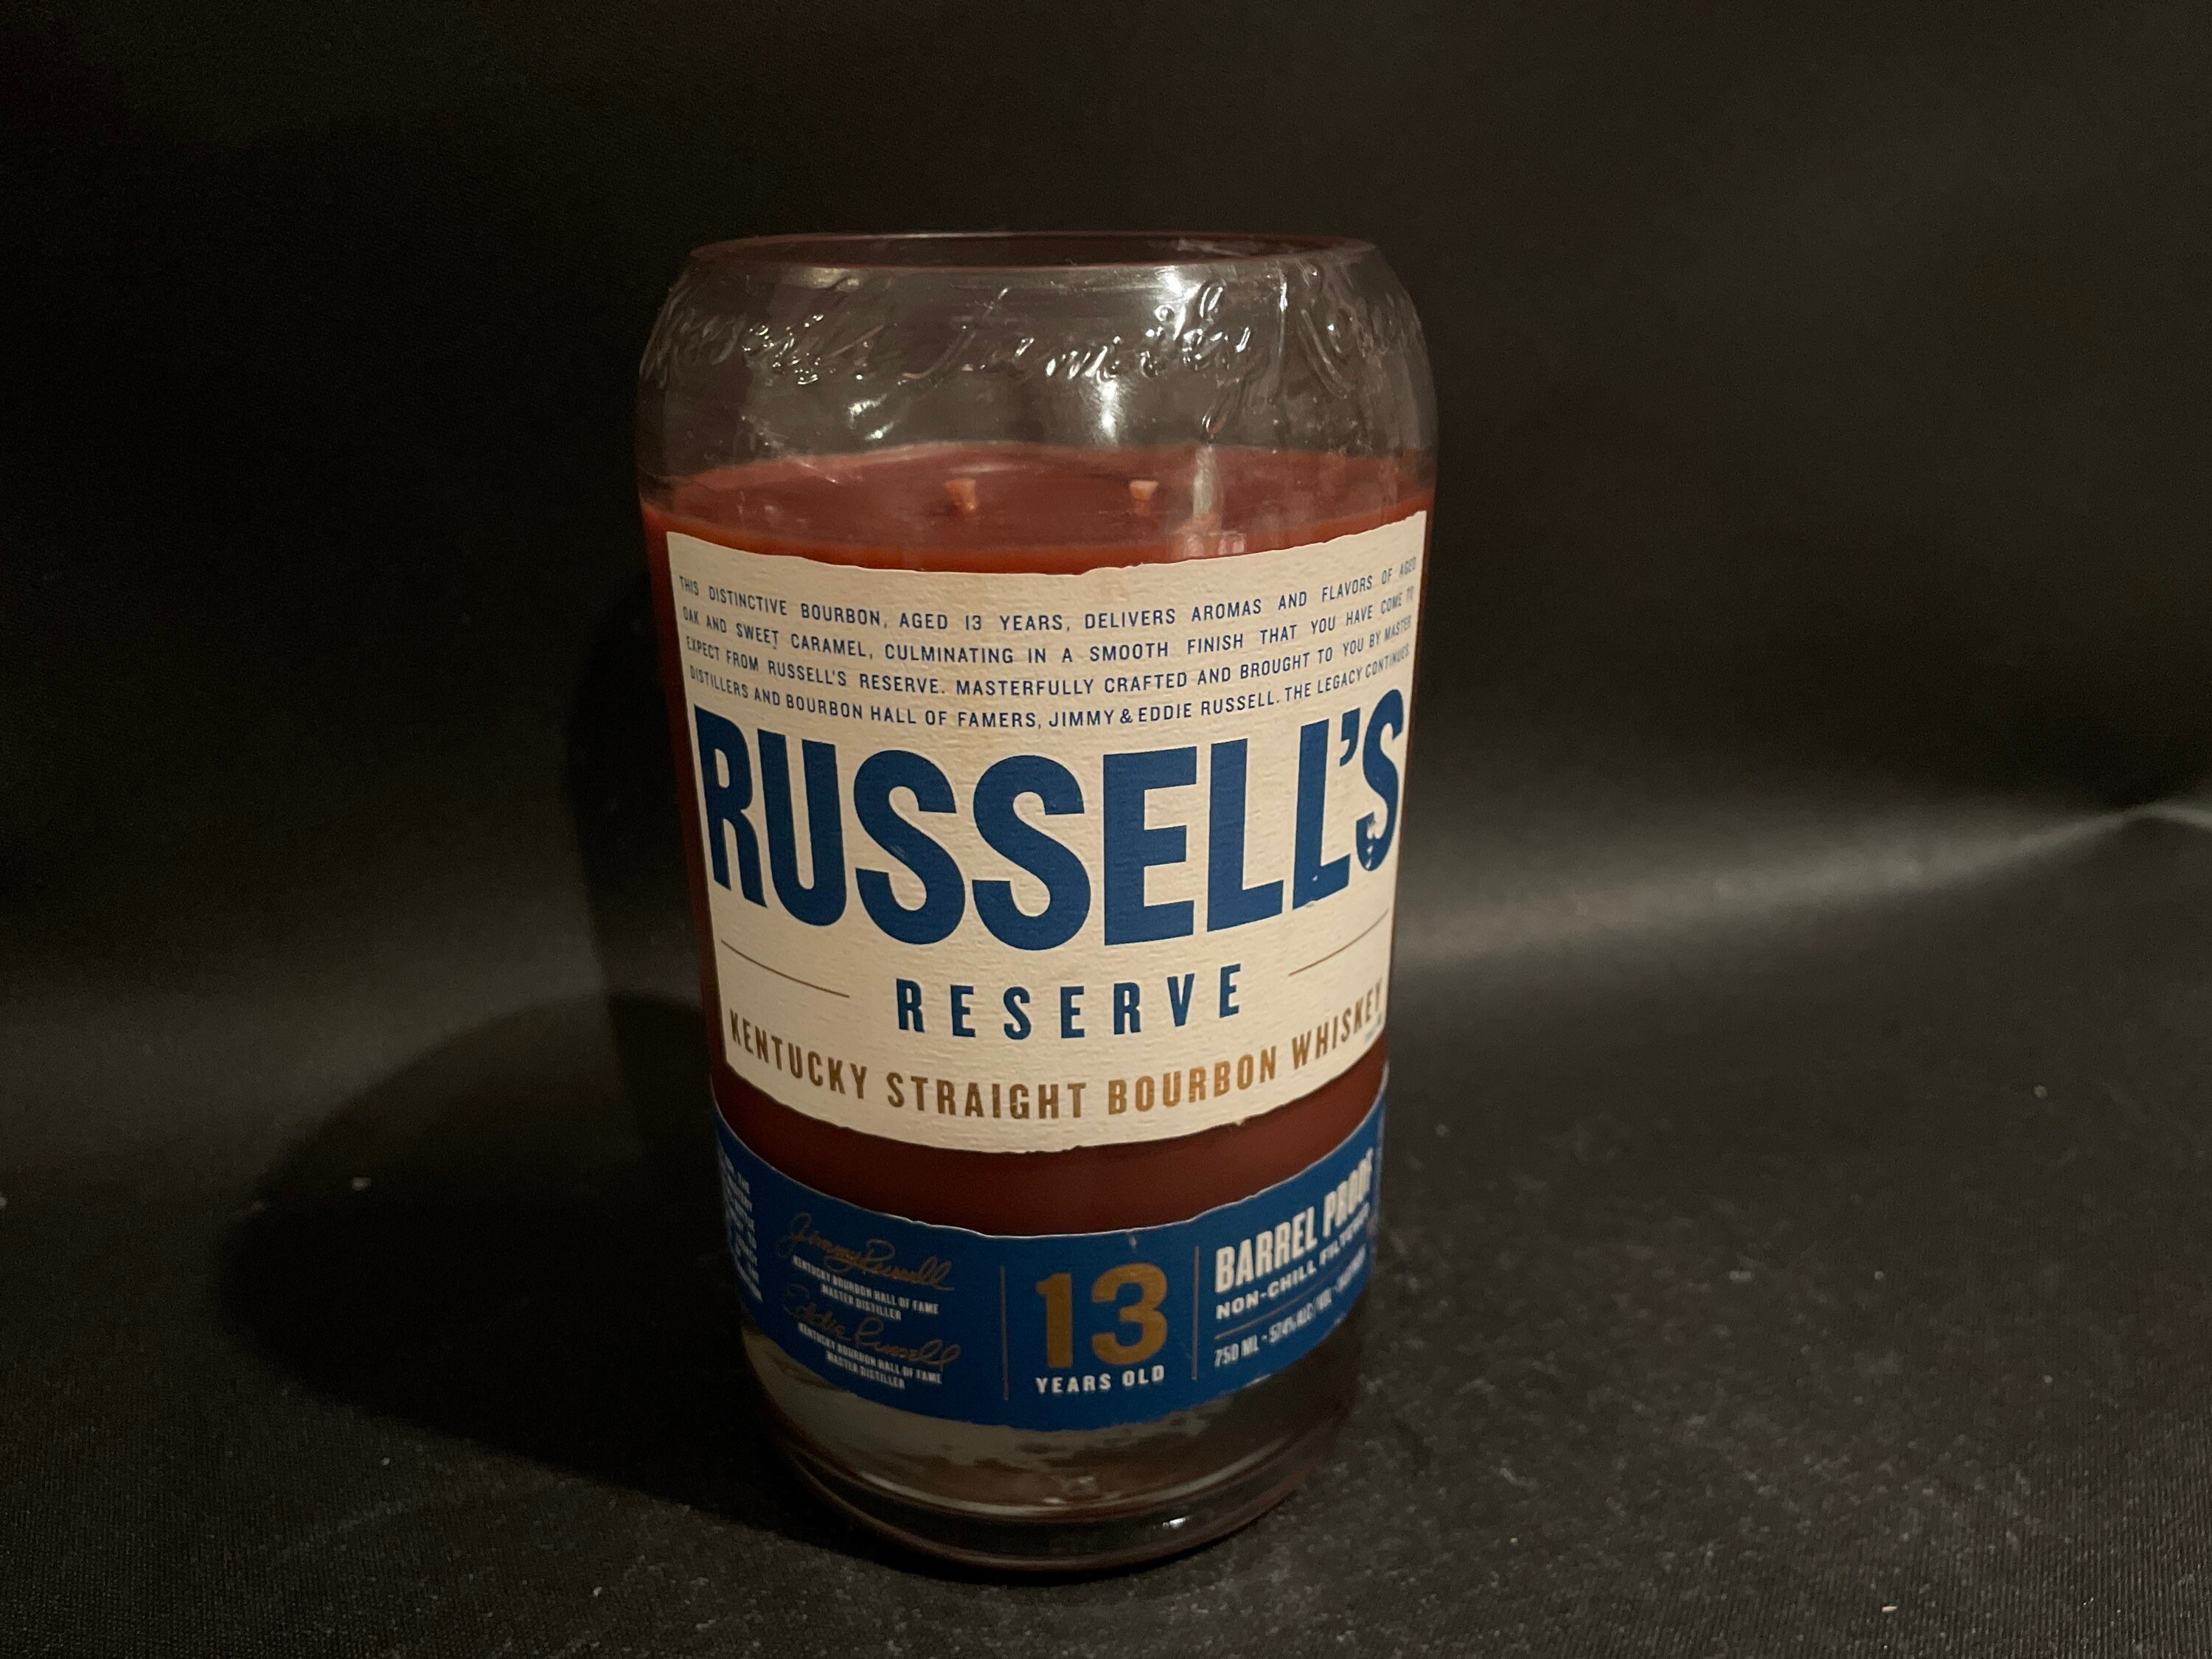 Wild Turkey Candle/russell's Reserve 13 Year Single Barrel Bourbon WHISKEY  BOTTLE Soy Candle/rare Bottle/ Russels Reserve Candle 